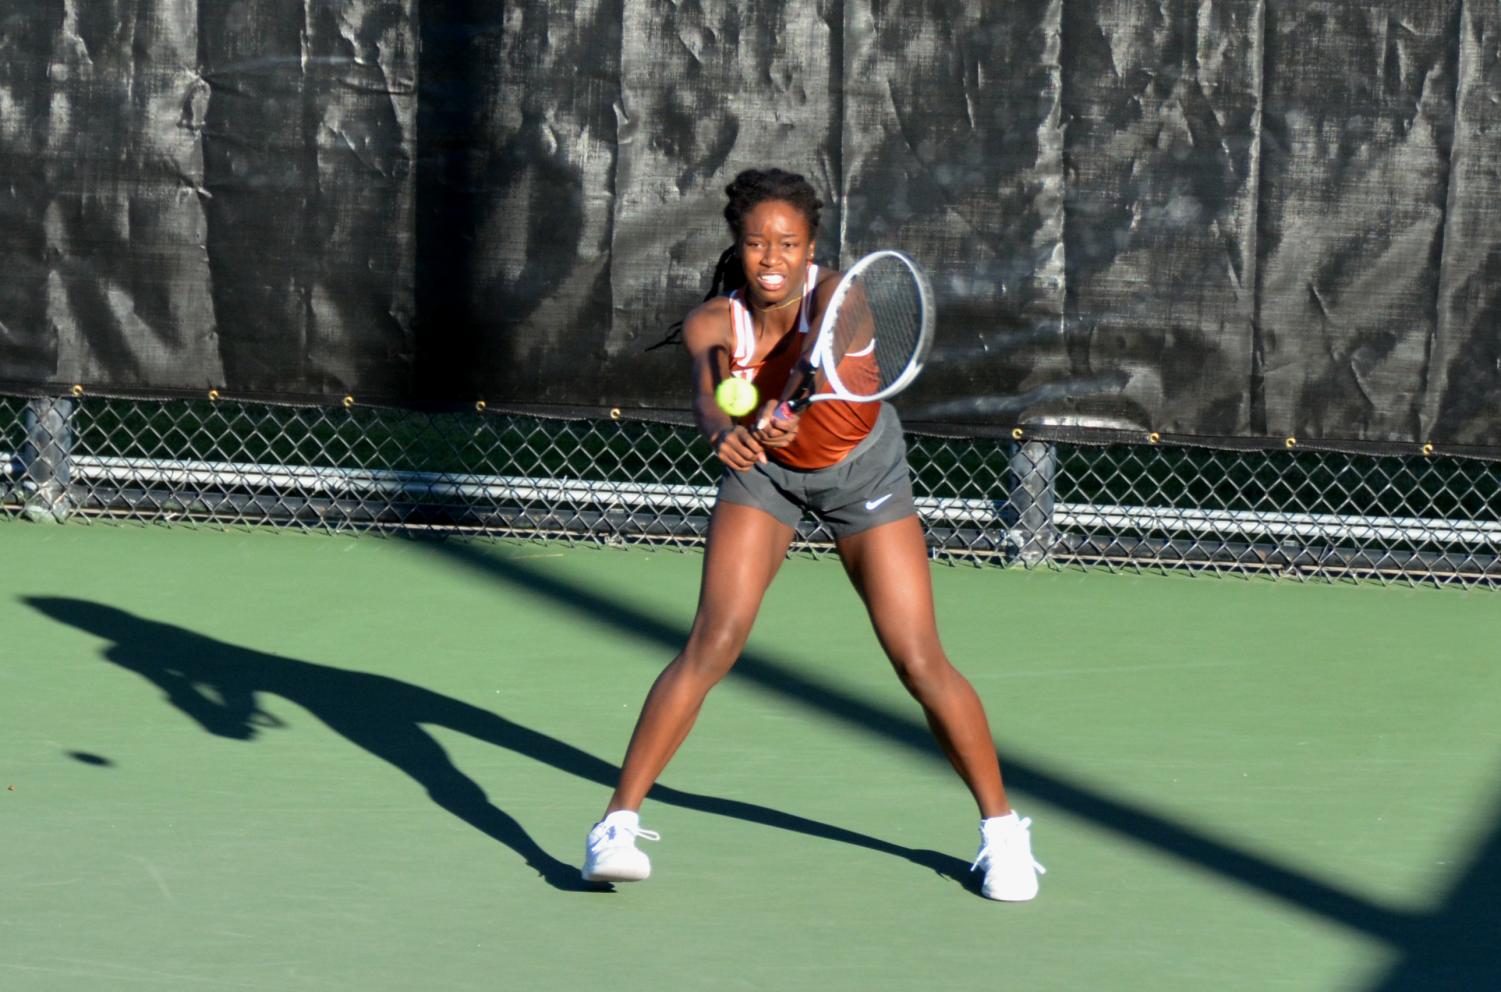 Varsity+Tennis+Reclaims+State+Title+10-3+over+Plano+West+to+Conclude+Momentous+Fall+Season